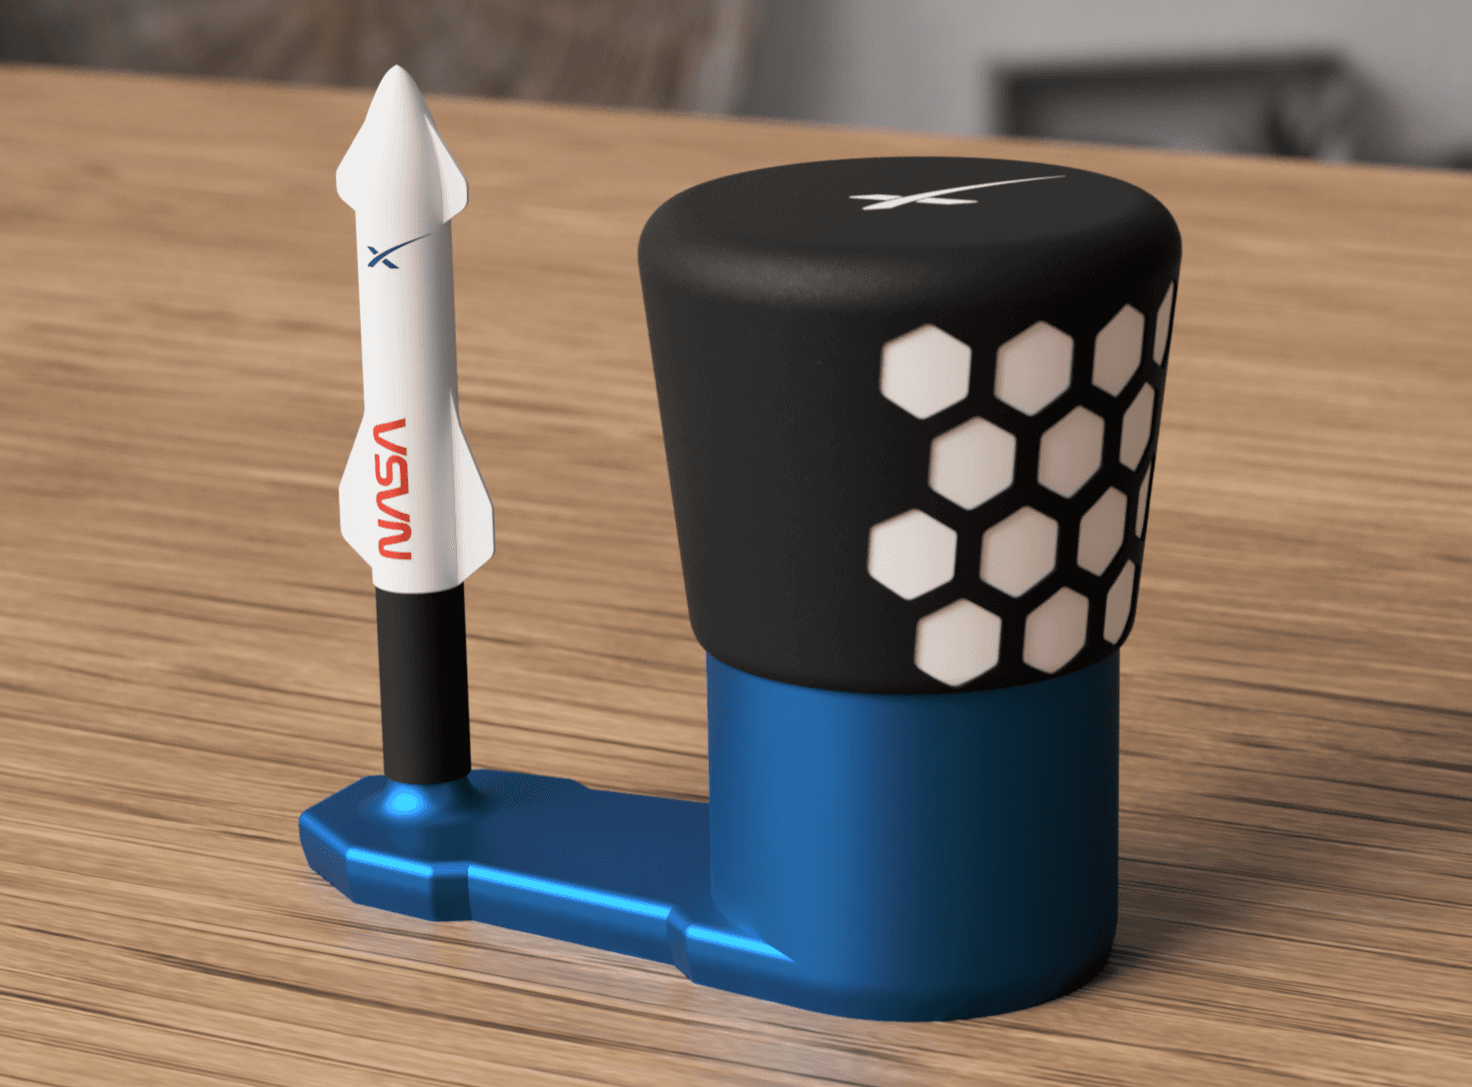 Starship Stomp Rocket Launcher SpaceX 3d model